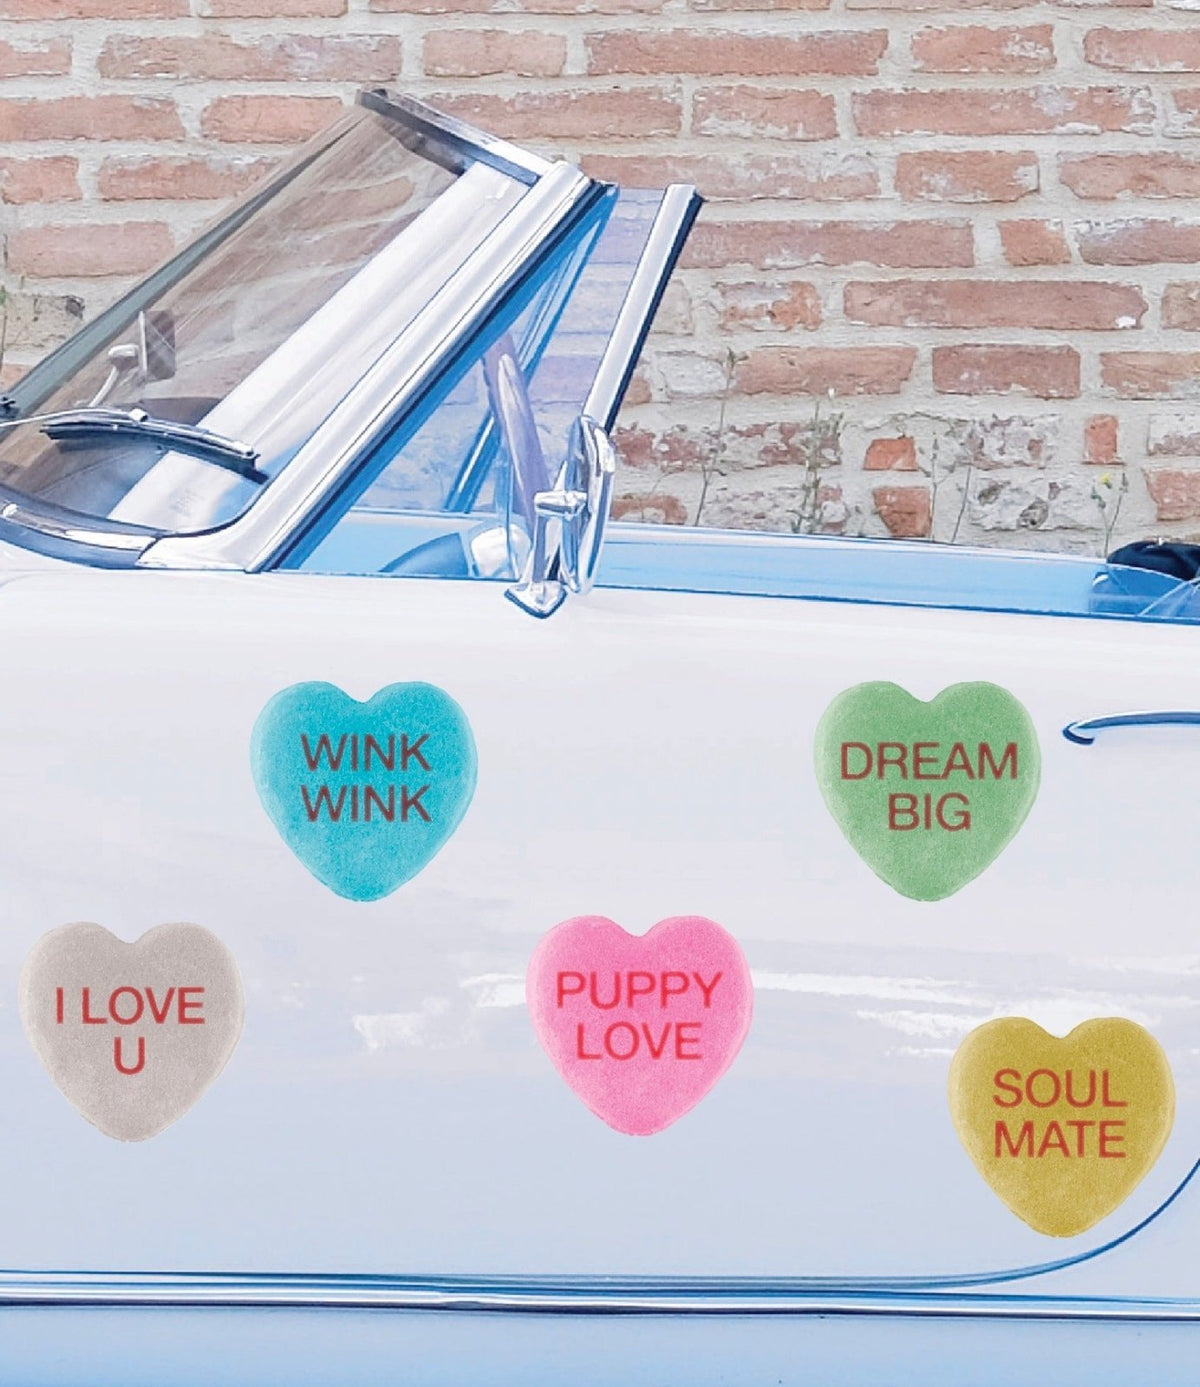 A vintage blue convertible car with heart-shaped stickers on the windshield displaying phrases like "wink wink" and "dream big" against a brick wall background, adorned with Cover-Alls candy hearts for Valentine's Day.